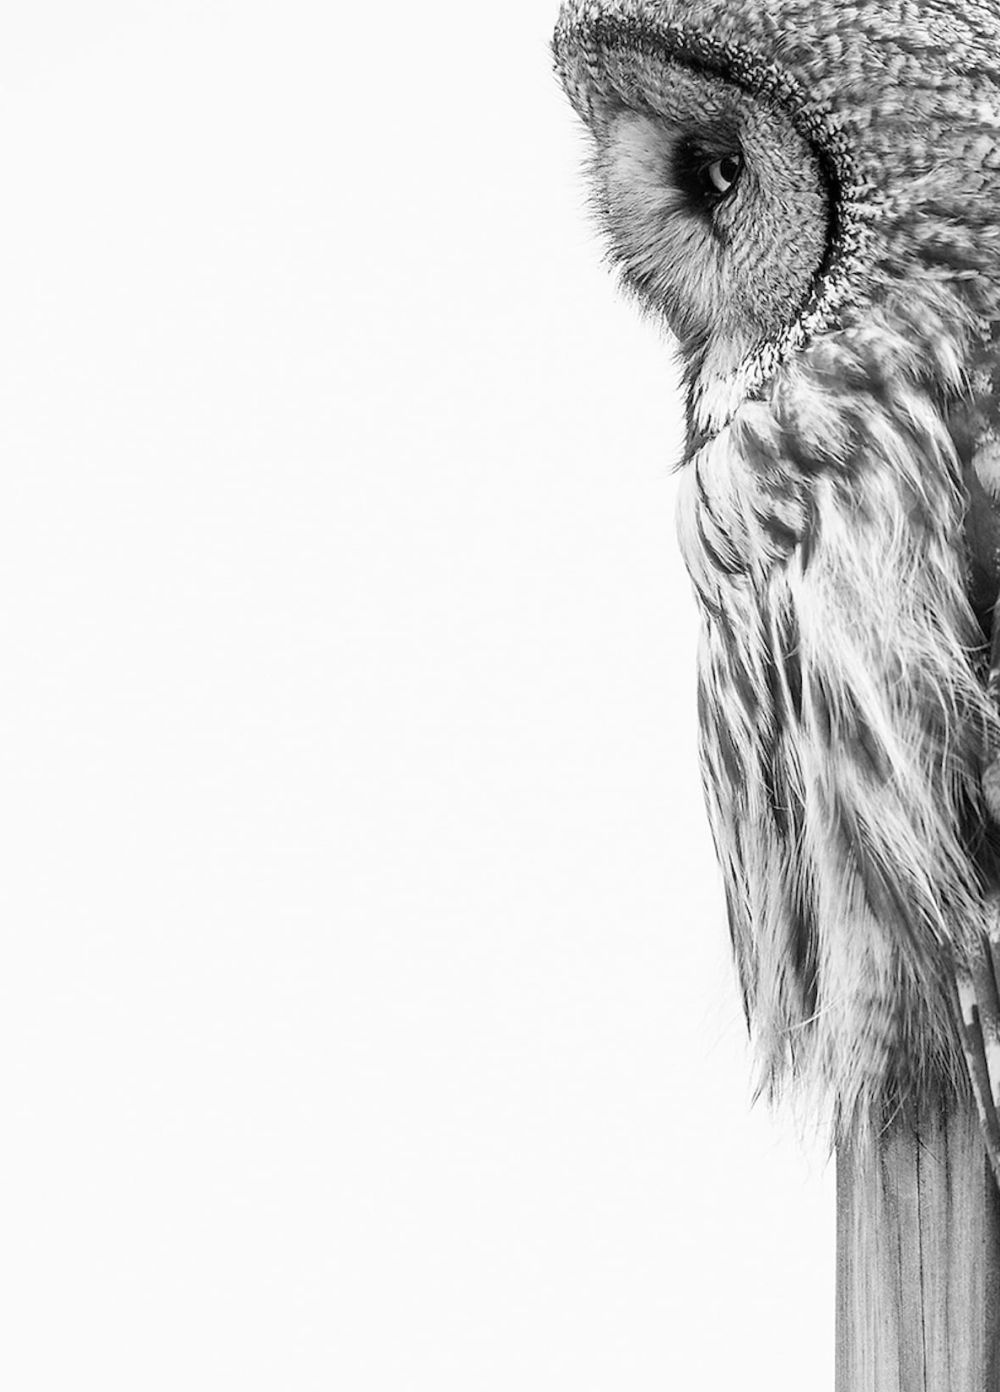 Bird Photographer of the Year Brings Mesmerizing Pictures of Avian Species